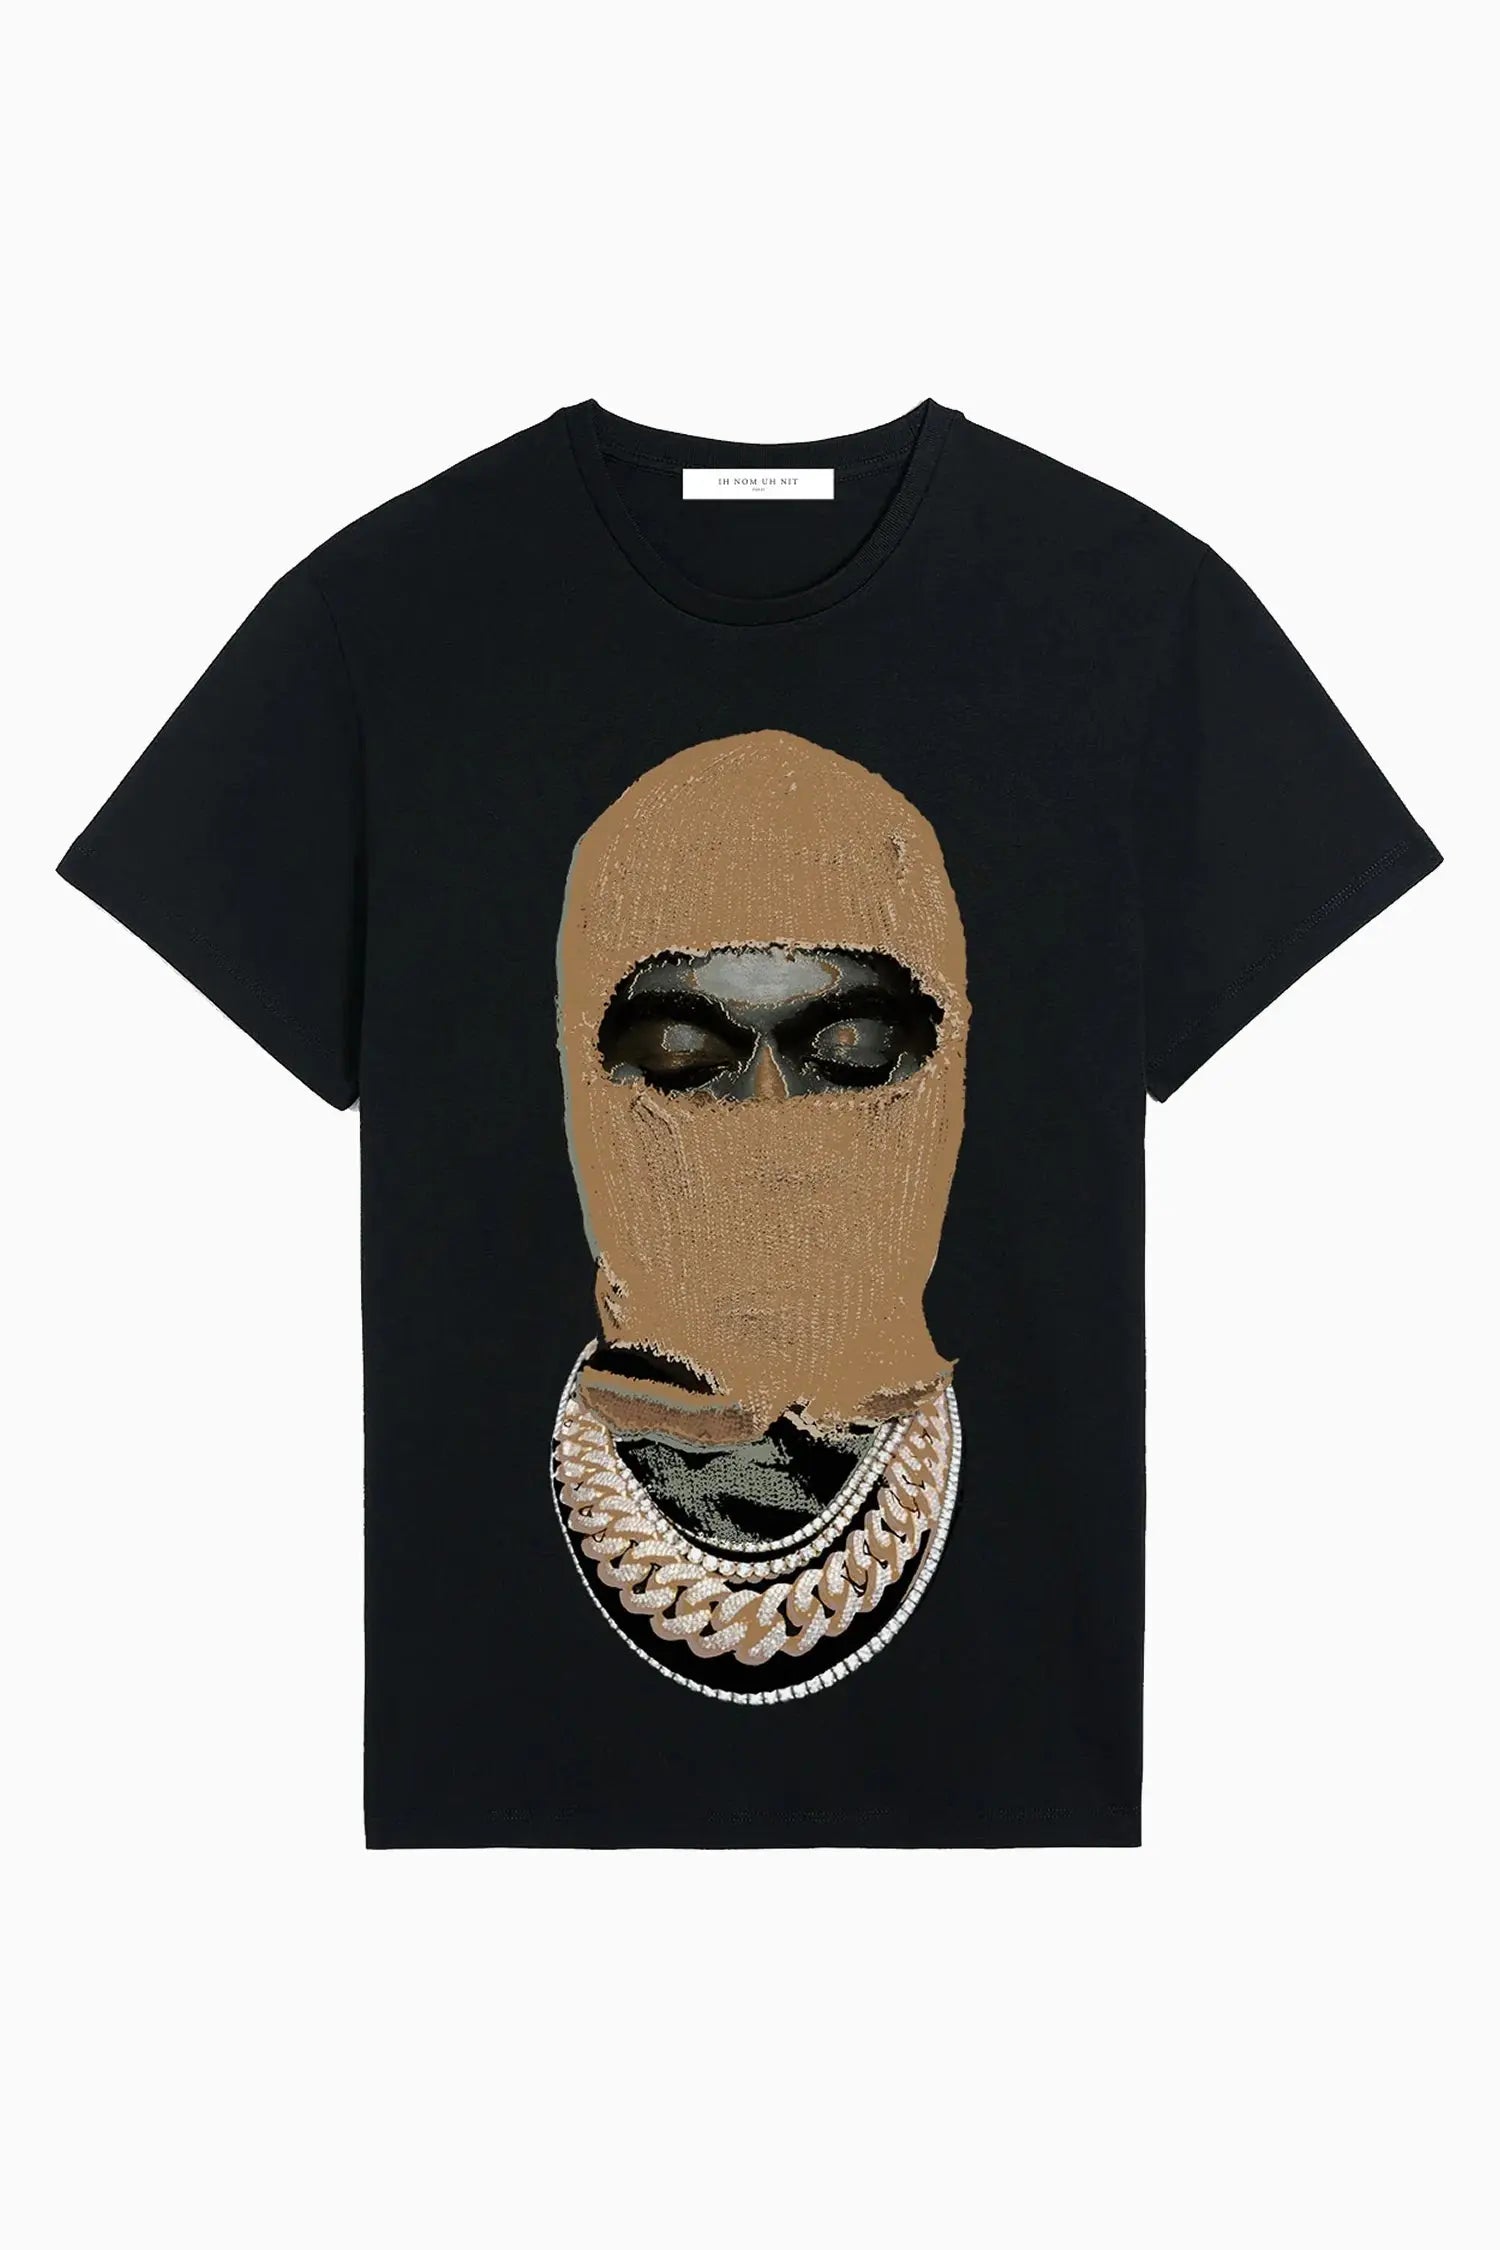 T-SHIRT WITH MASK21 - IH NOM UH NIT